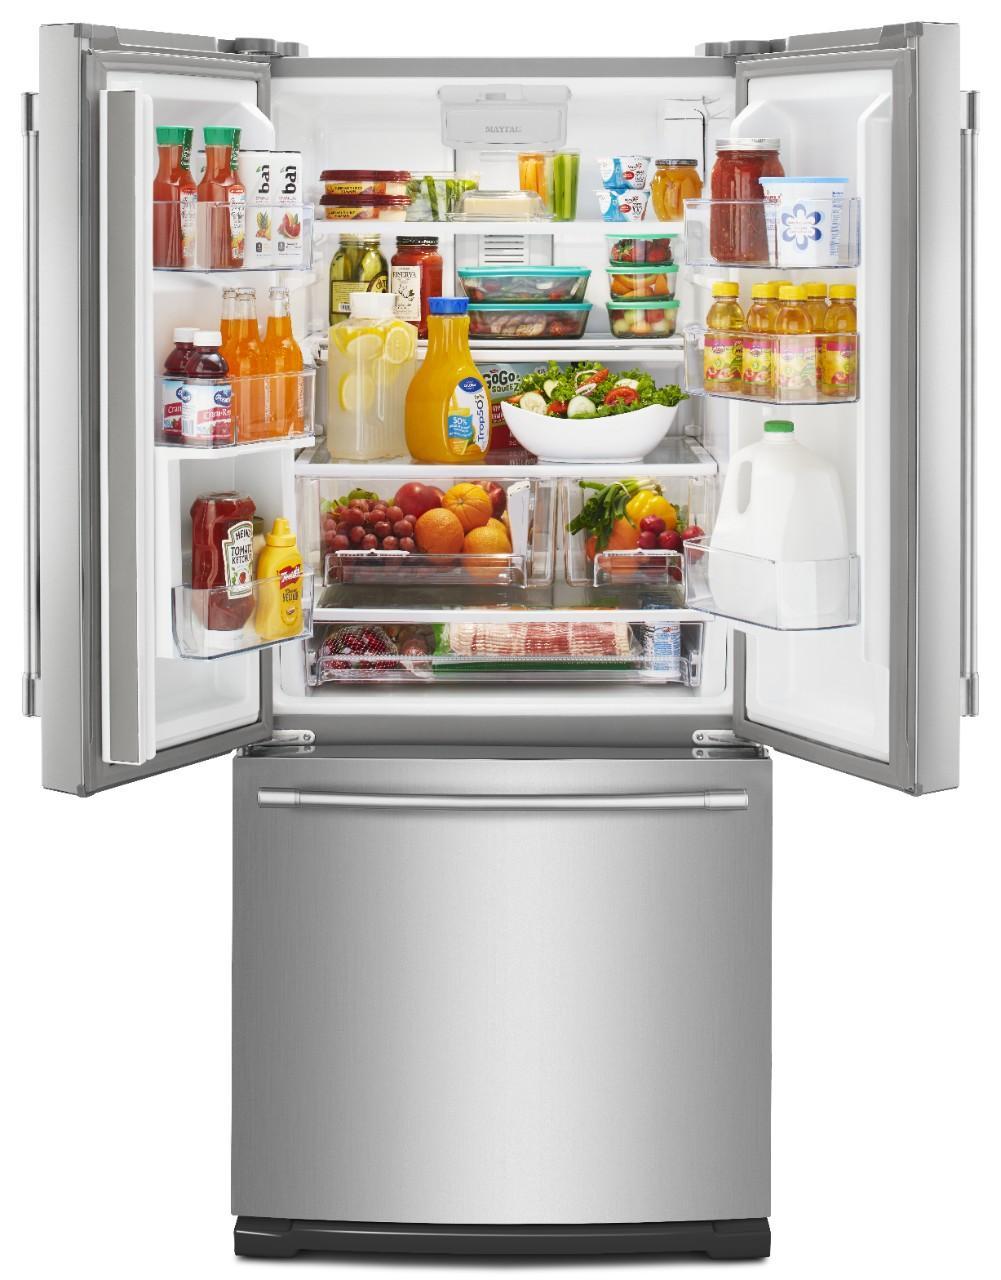 Maytag - 30.13 Inch 19.68 cu. ft French Door Refrigerator in Stainless - MFW2055FRZ